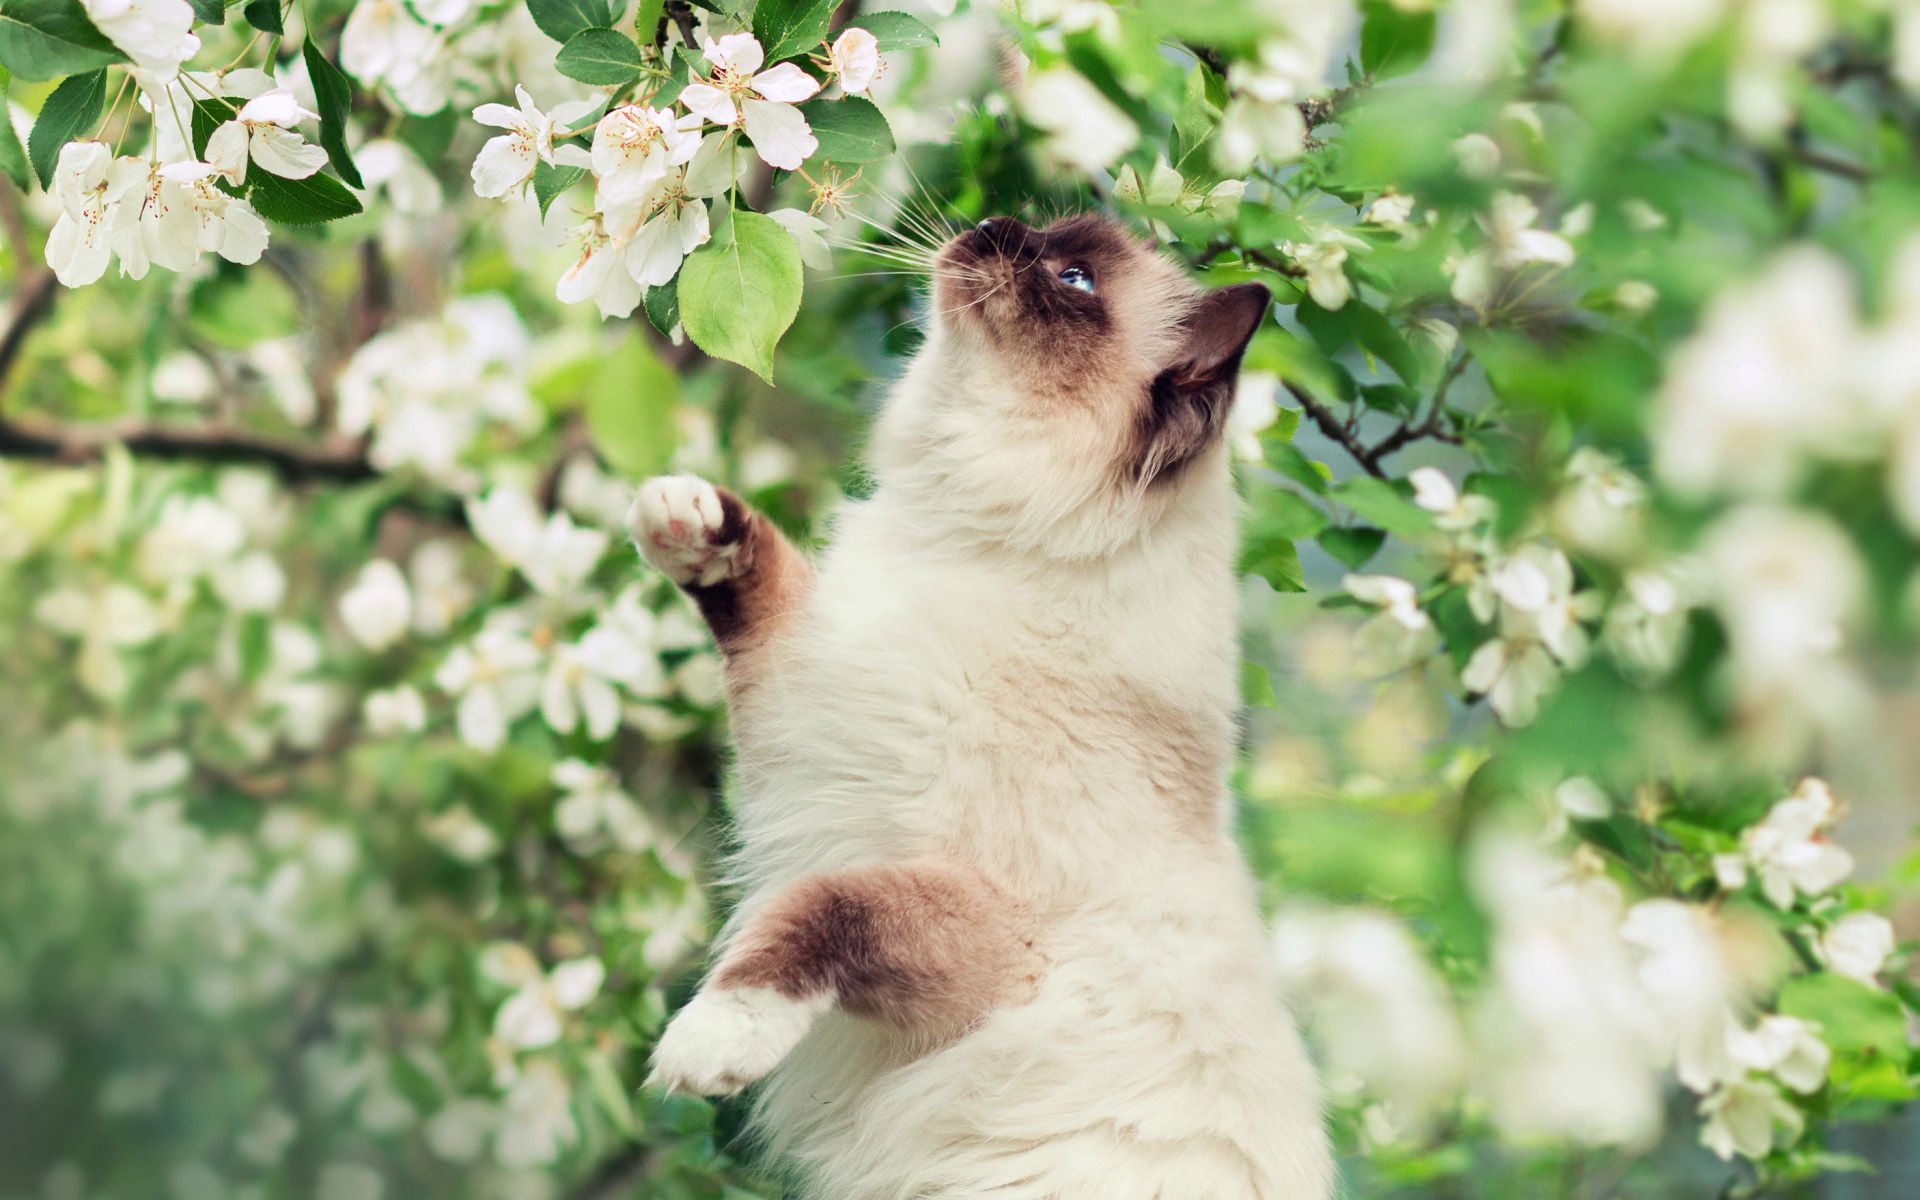 Download Wallpaper Himalayan Cat, Spring, Close Up, White Flowers, Cute Animals, Cats, Himalayan For Desktop With Resolution 1920x1200. High Quality HD Picture Wallpaper